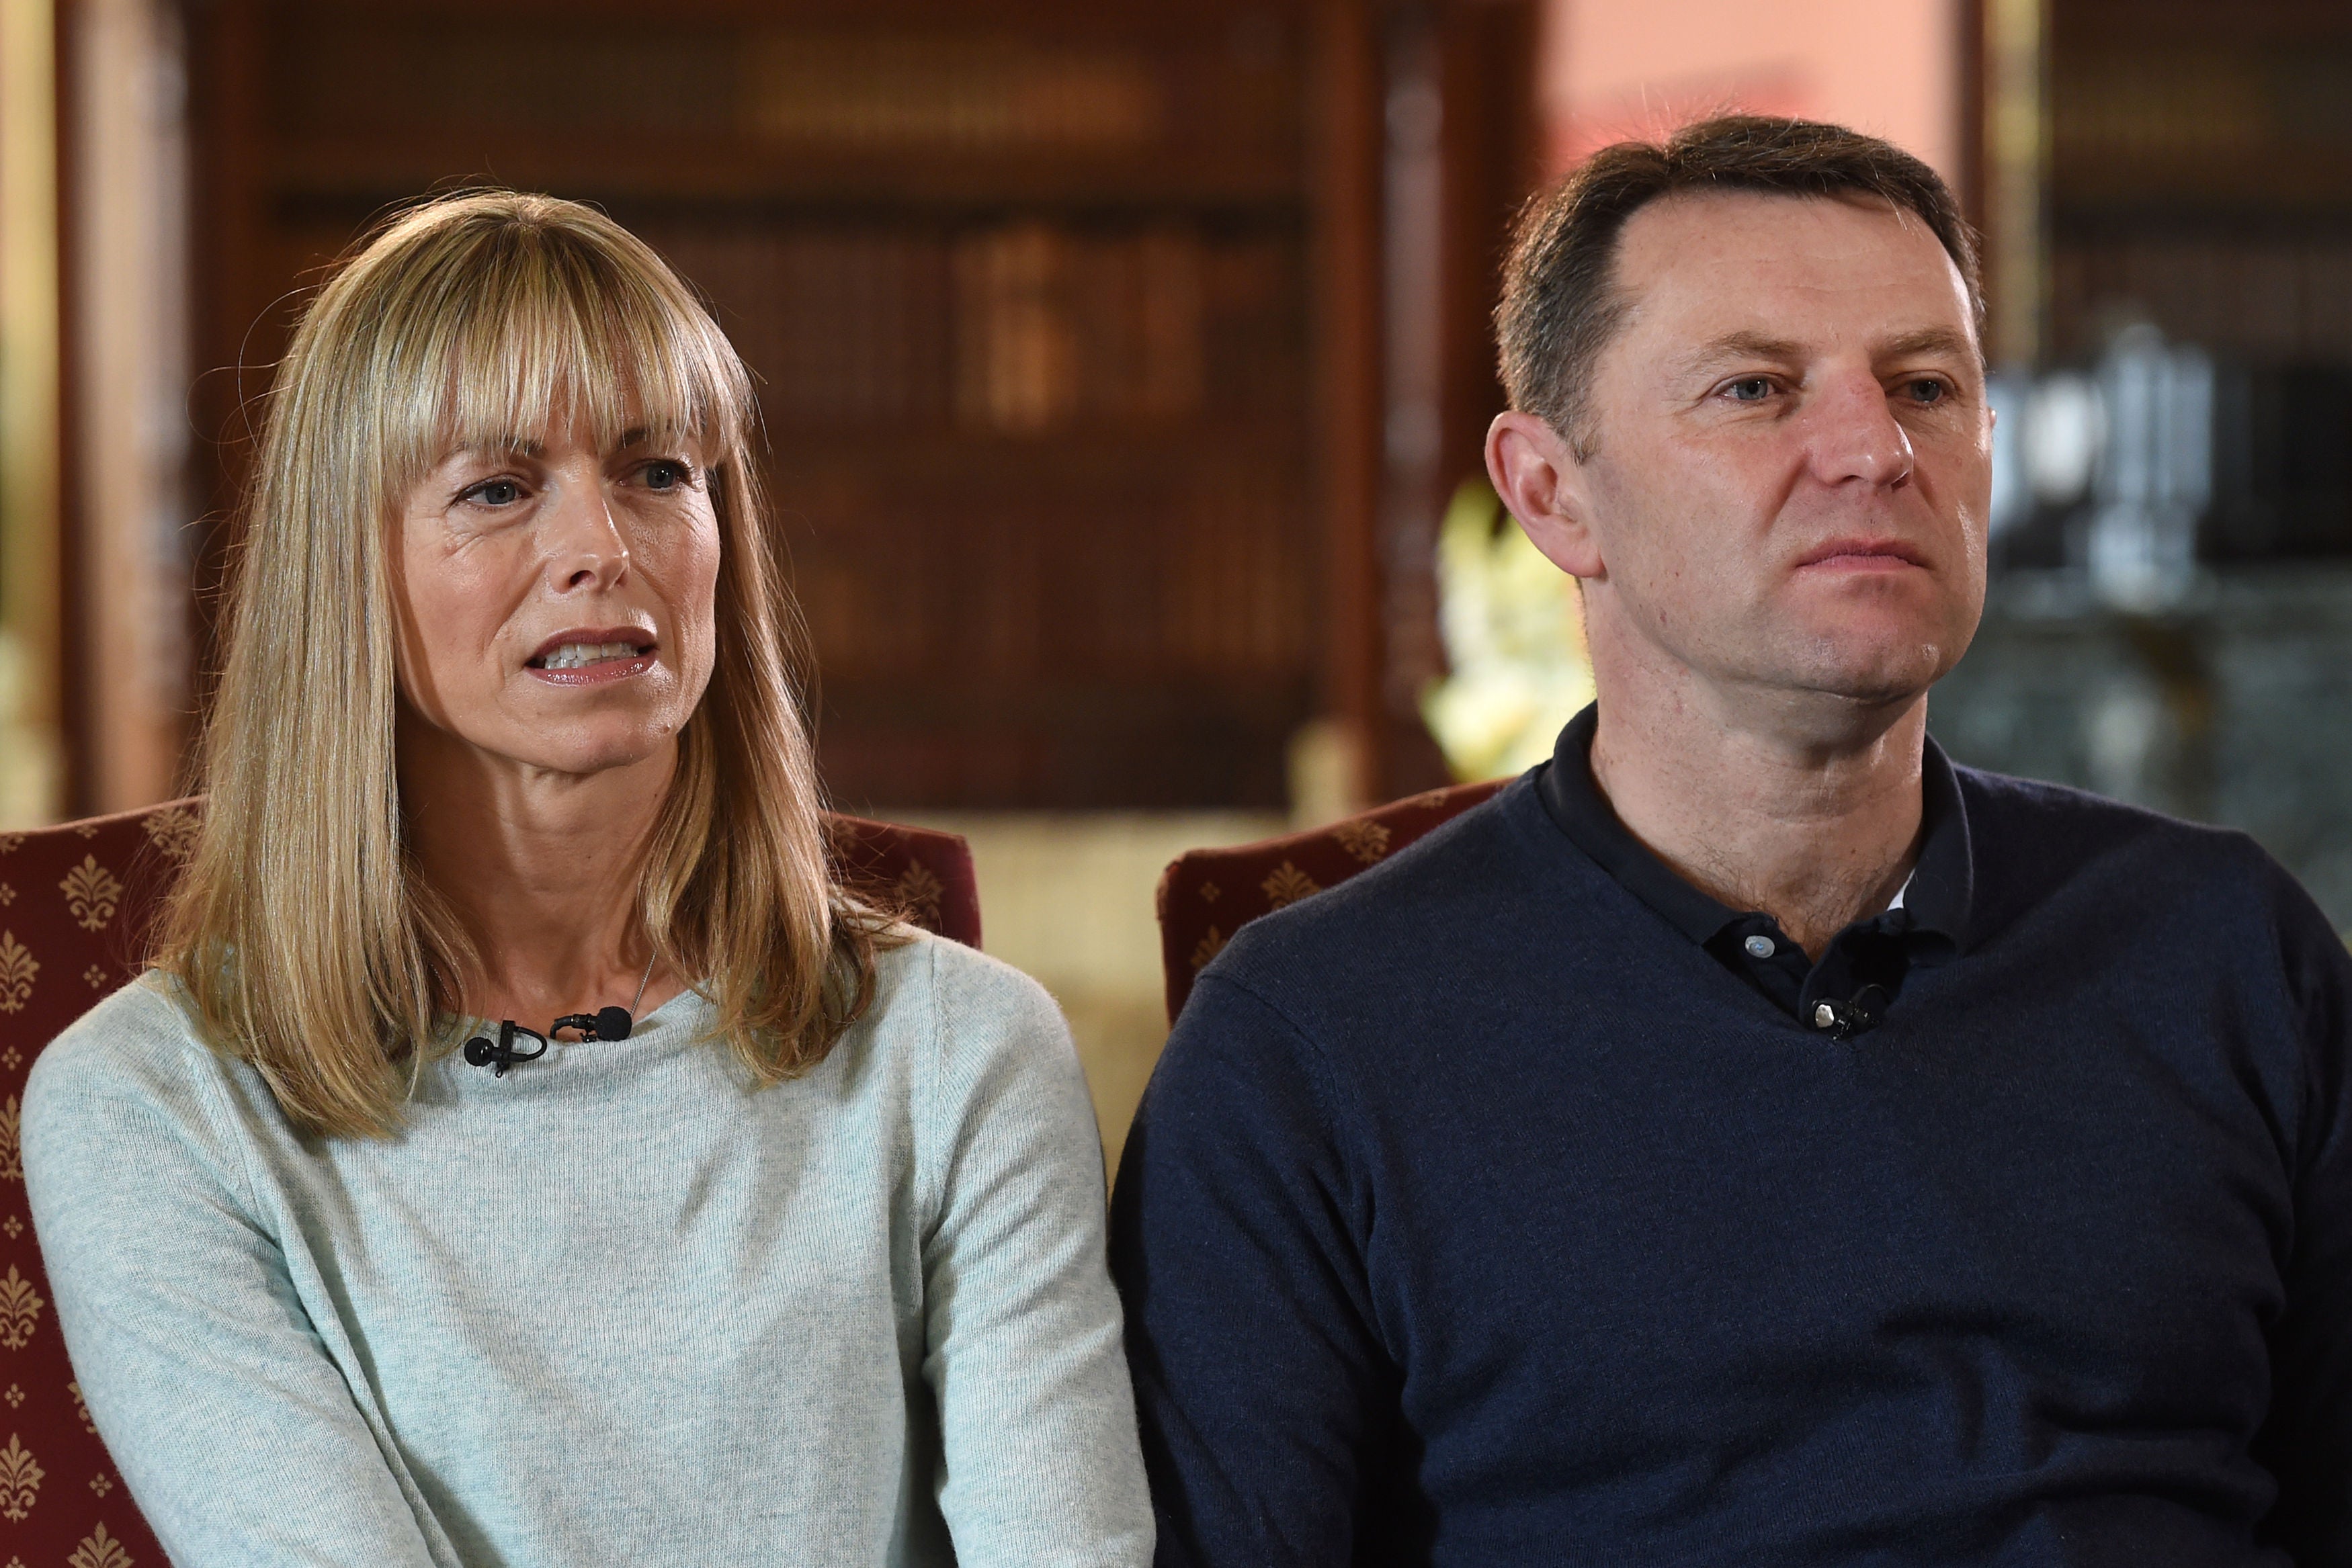 Portuguese police apologised to Kate and Gerry McCann earlier this year